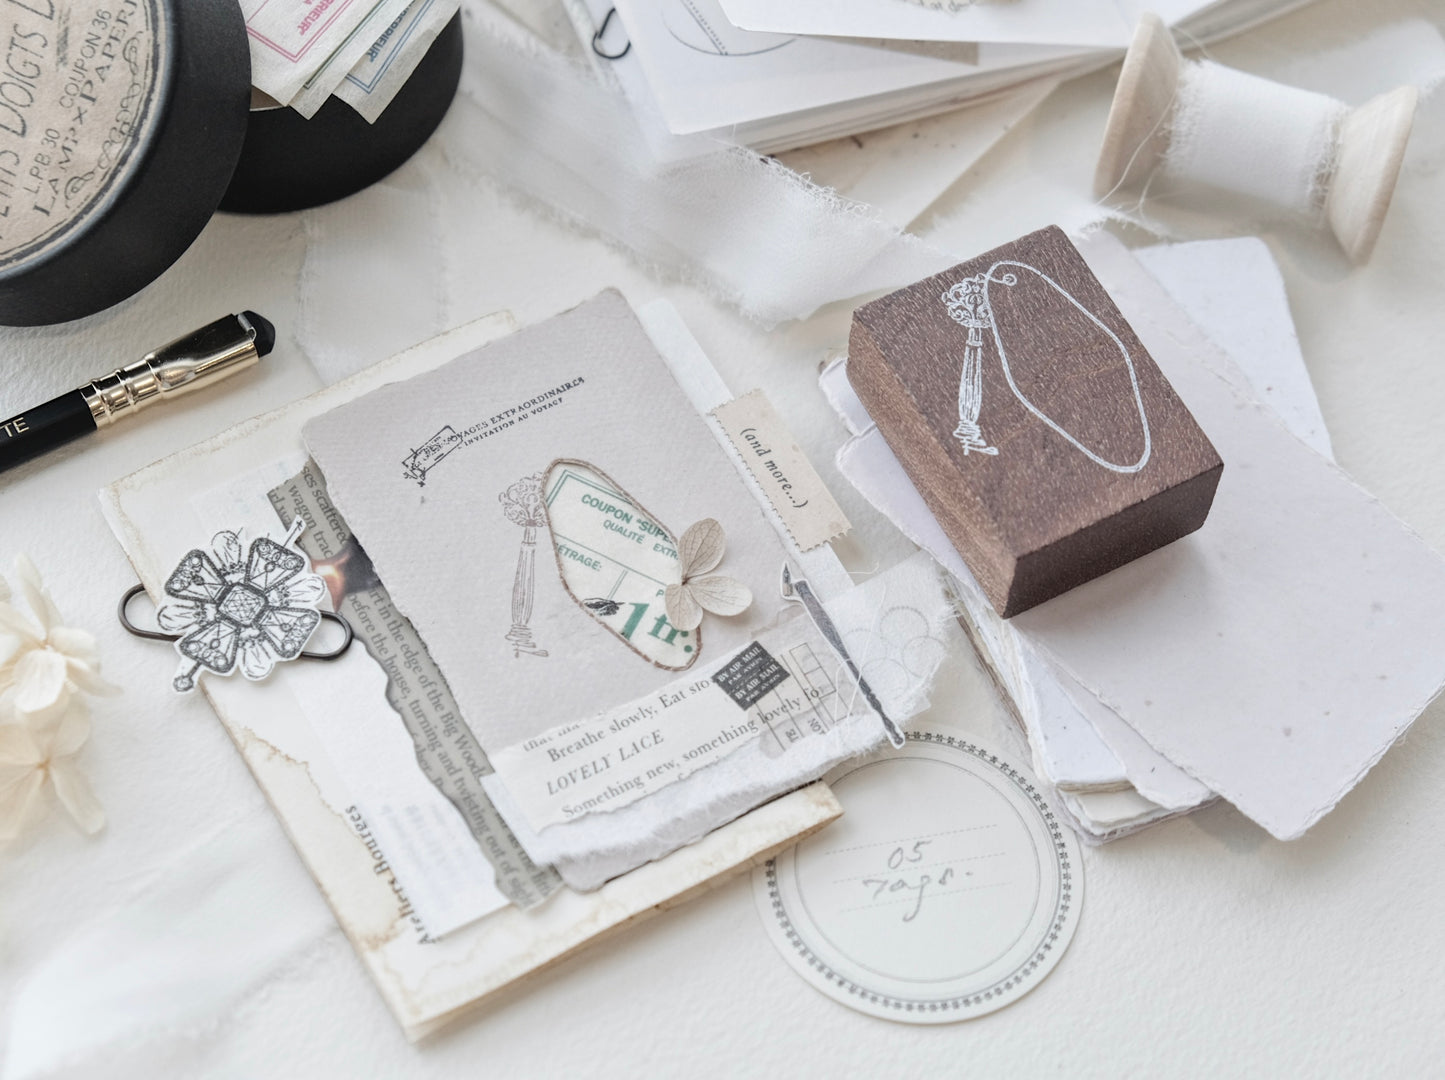 Jieyanow Atelier Not Your Usual Tags Rubber Stamps